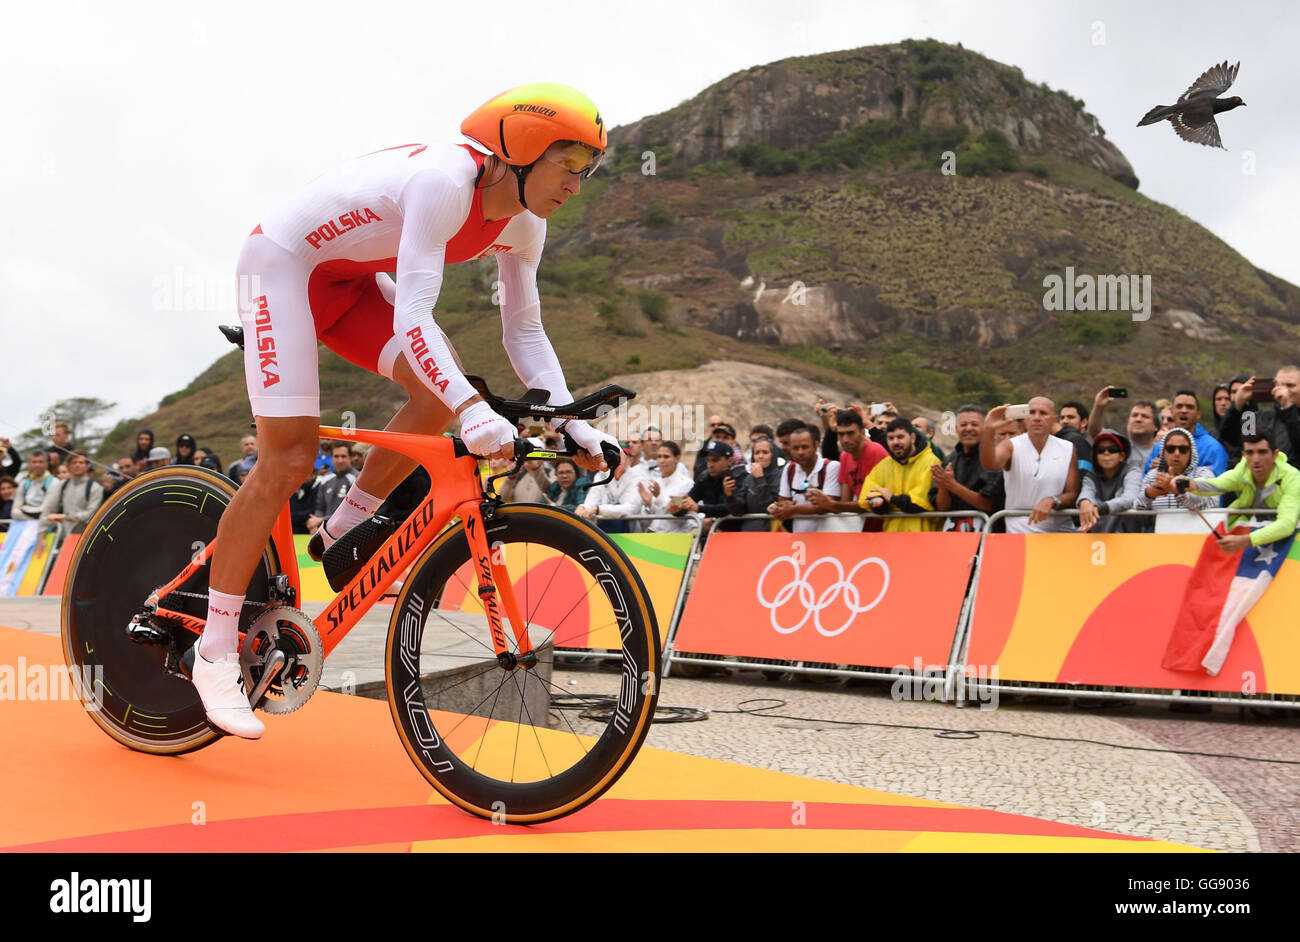 Rio de Janeiro, Brazil. 10th Aug, 2016. Maciej Bodnar of Poland at the start of the men's Individual Time Trial of the Rio 2016 Olympic Games Road Cycling events at Pontal in Rio de Janeiro, Brazil, 10 August 2016. Photo: Sebastian Kahnert/dpa/Alamy Live News Stock Photo